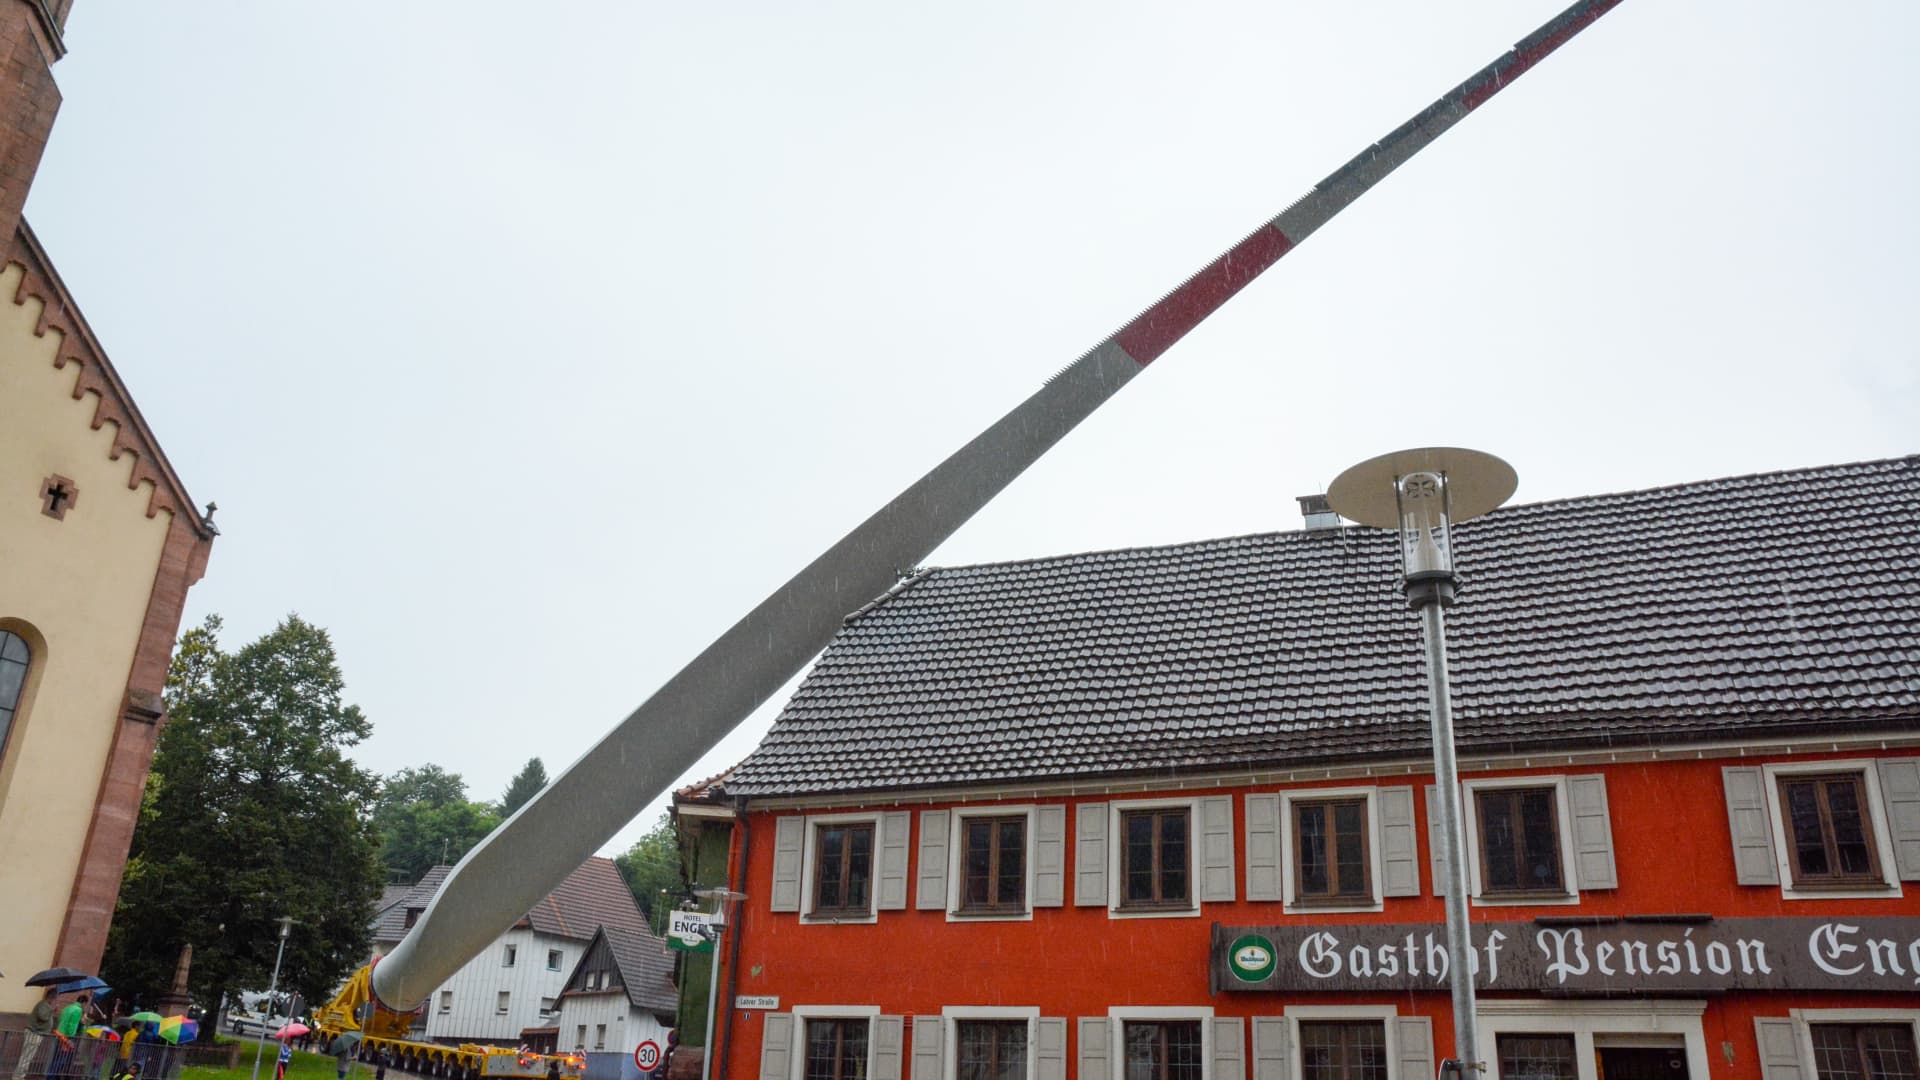 As the components of wind turbines get bigger, logistical challenges faced by the sector also look set to grow. This image, from August 2021, shows a 69-meter long rotor blade being transported in Germany.